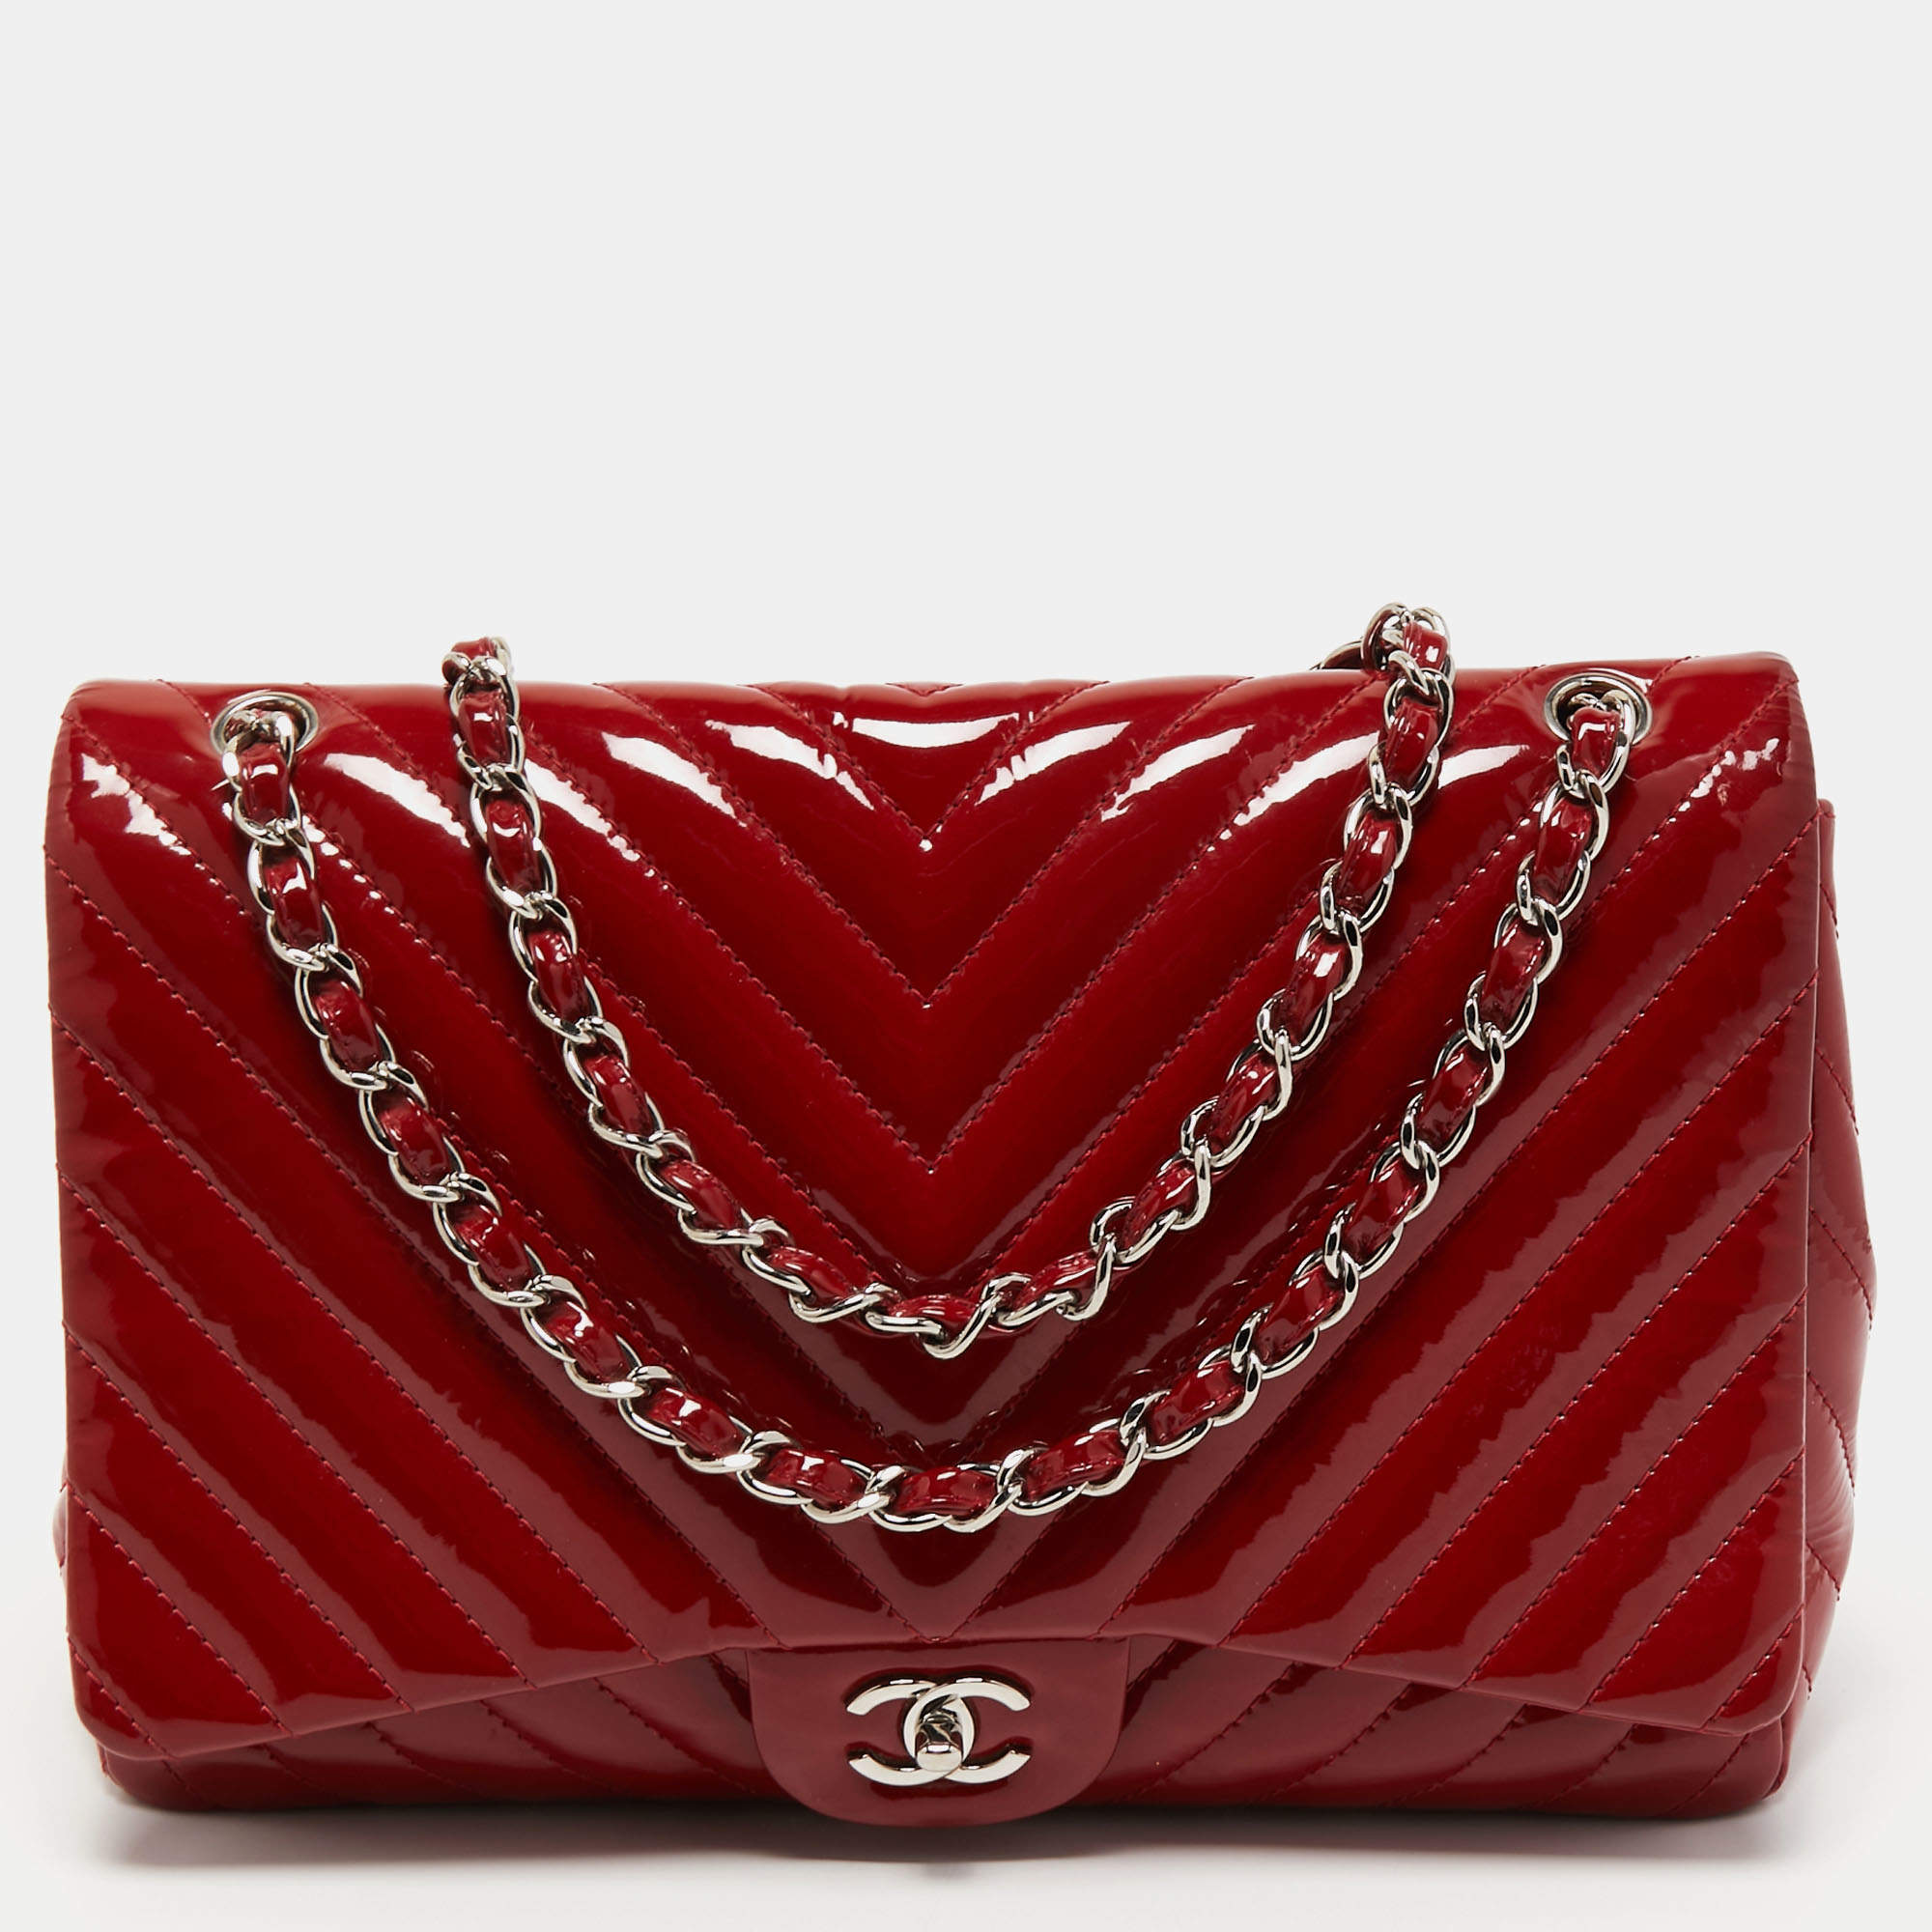 Chanel Red Chevron Patent Leather Maxi Classic Single Flap Bag